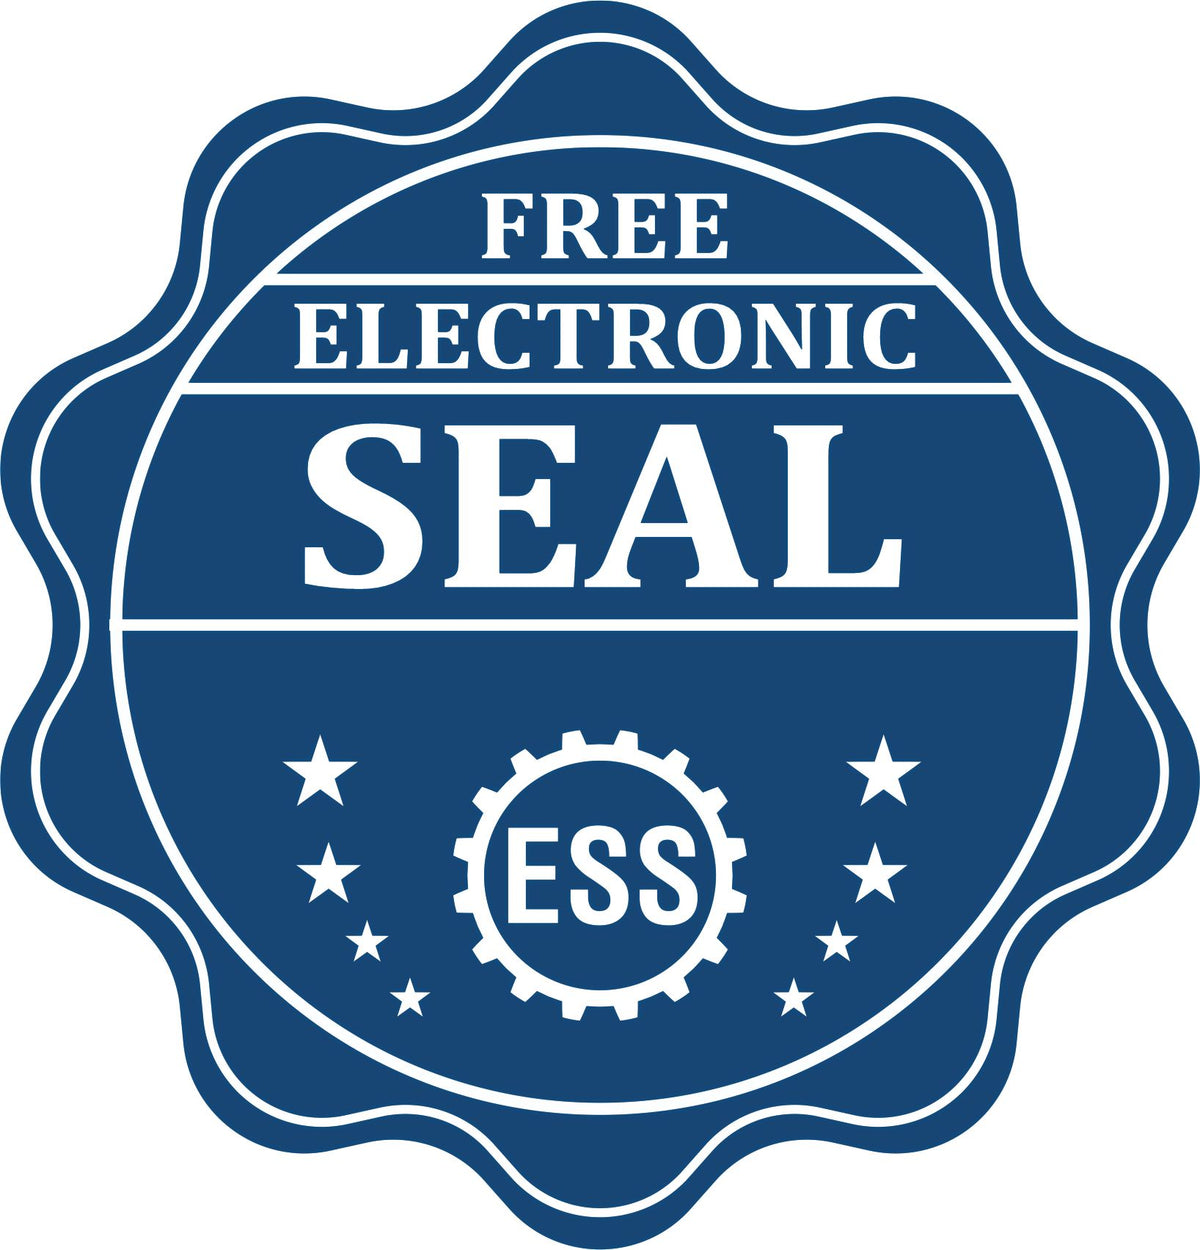 A badge showing a free electronic seal for the Super Slim North Carolina Notary Public Stamp with stars and the ESS gear on the emblem.